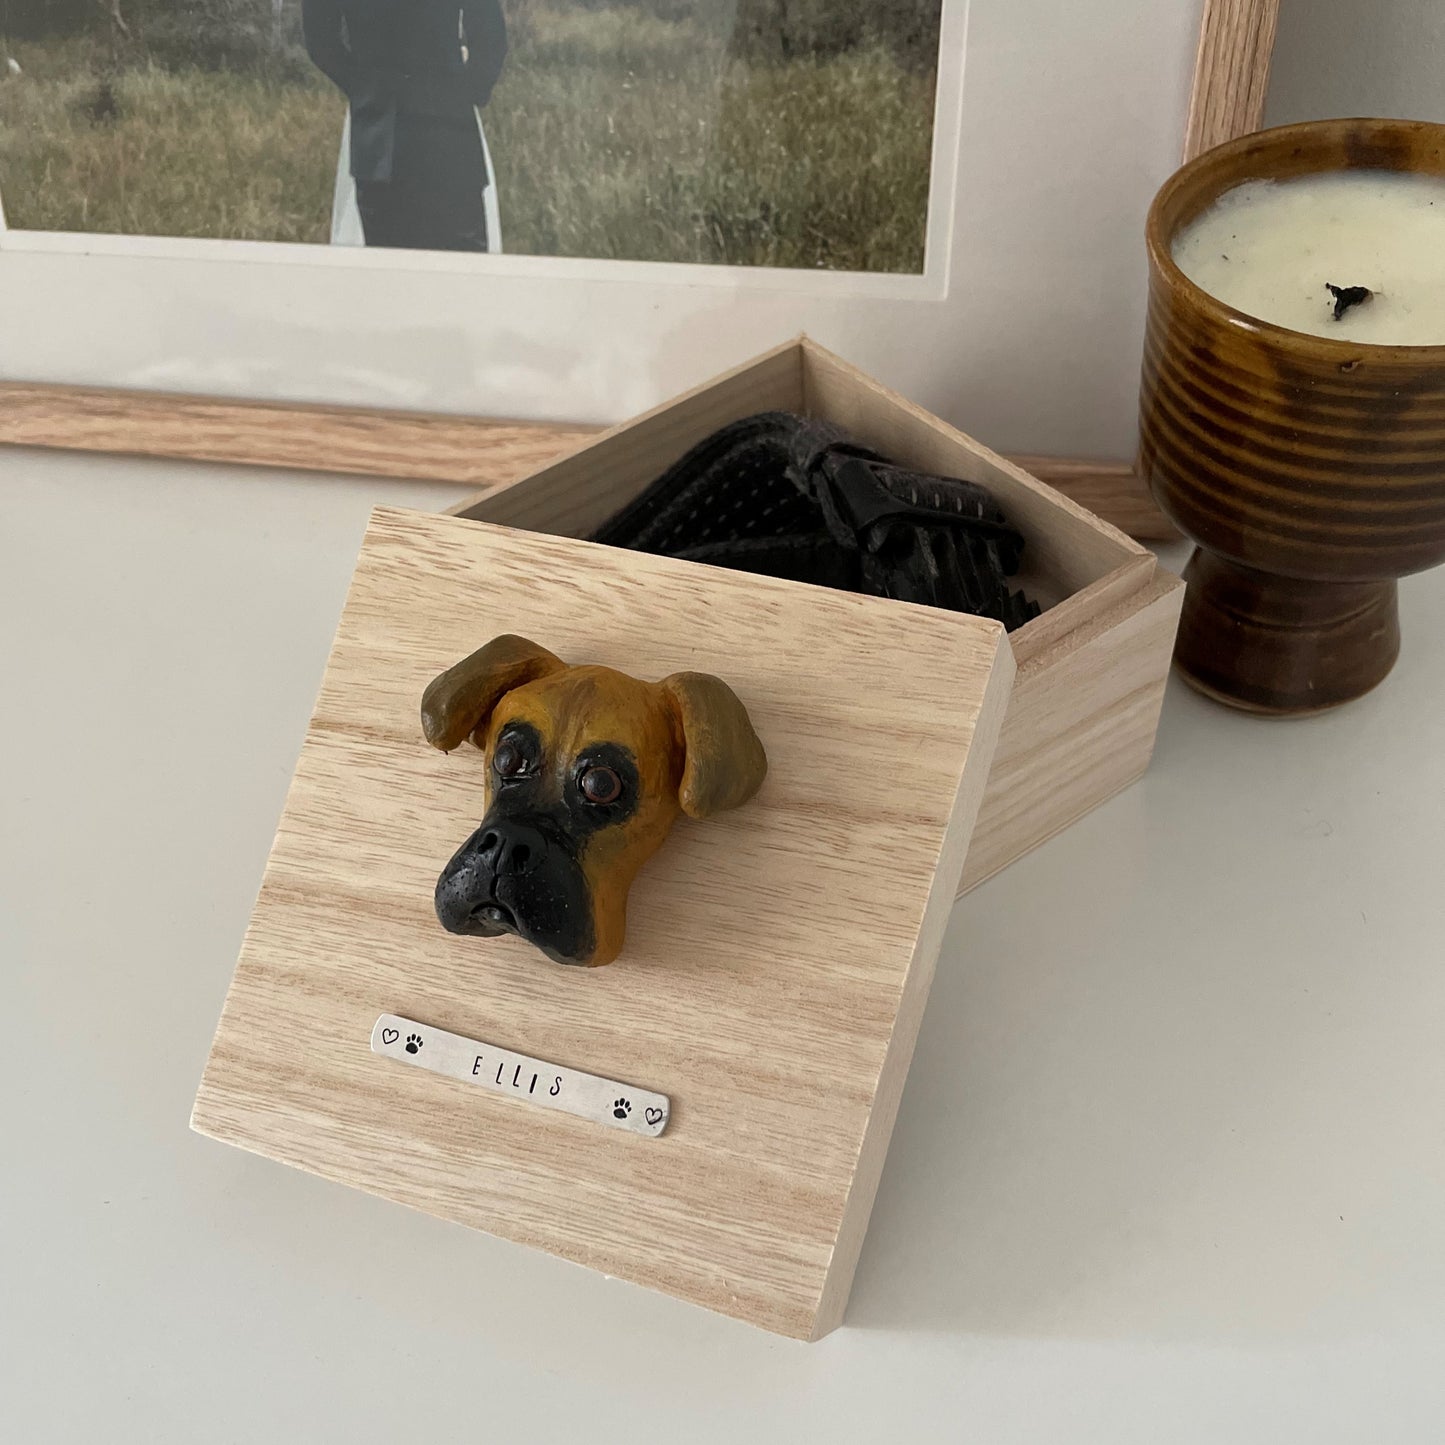 Custom timber pet memorial keepsake box with handscultped dog face on the lid, with a name plaque reading Ellis.